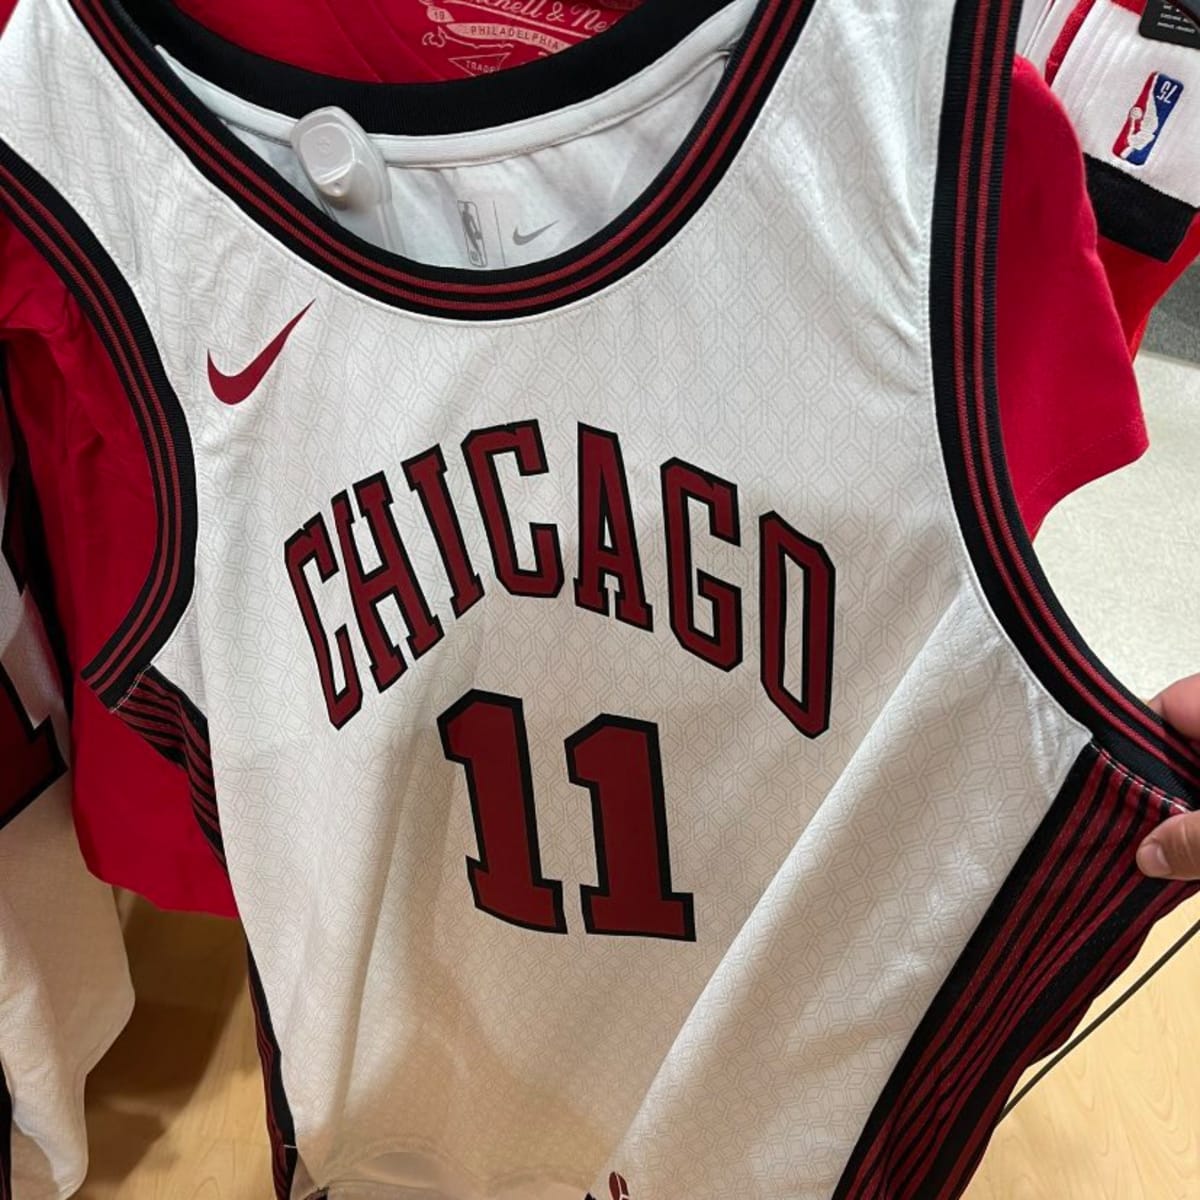 Bulls debut their new 'City Edition' uniforms on Friday